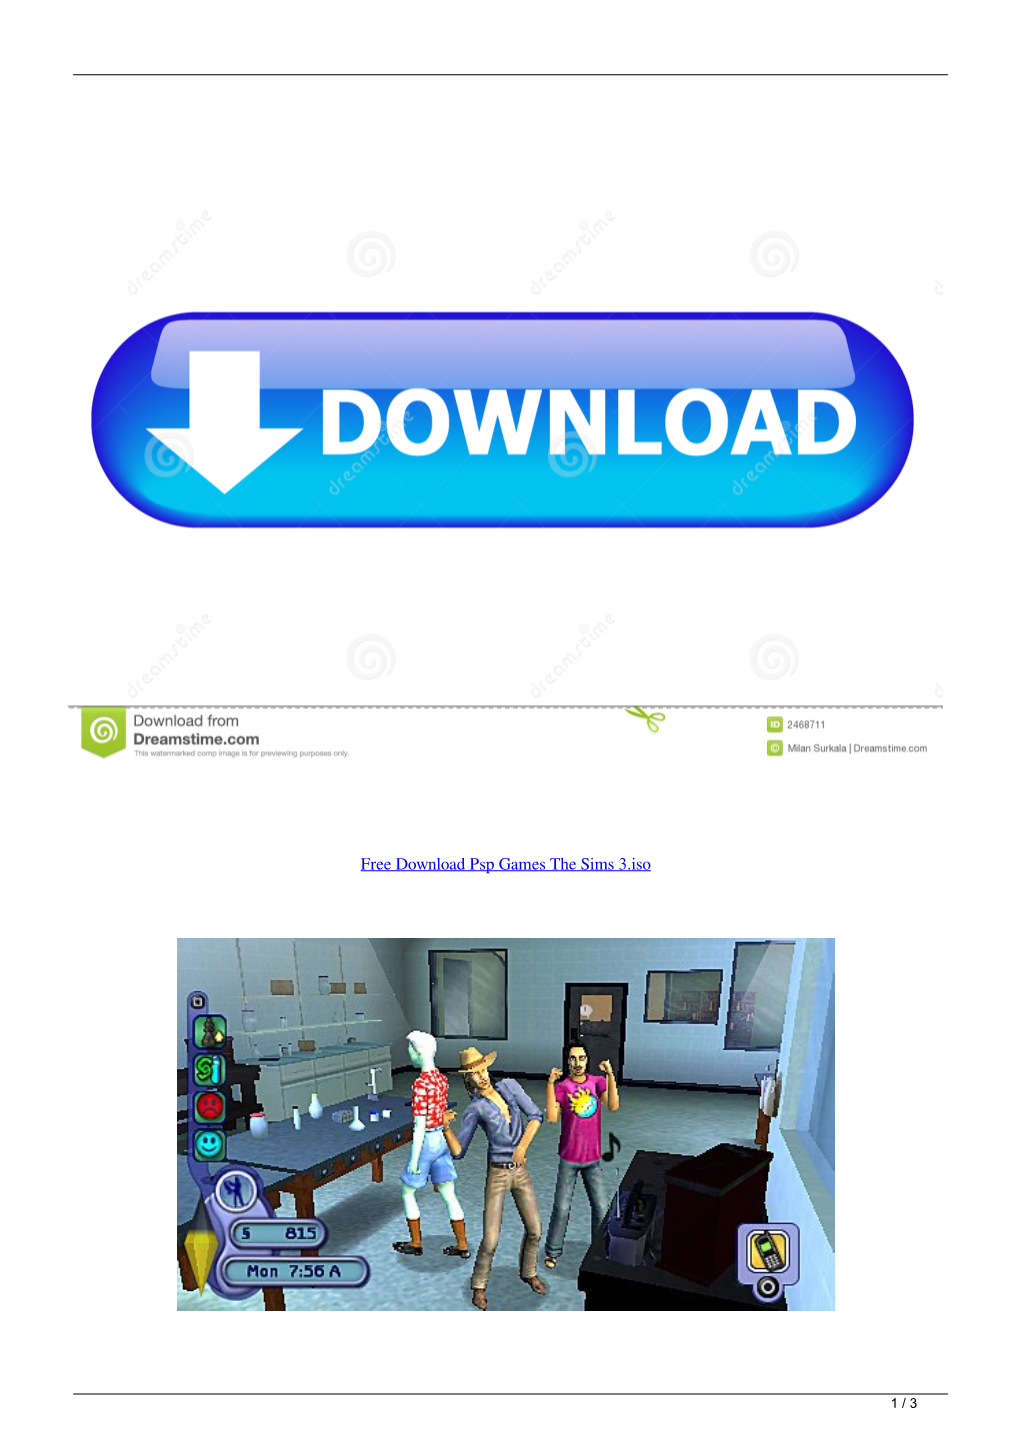 Free Download Psp Games the Sims 3Iso